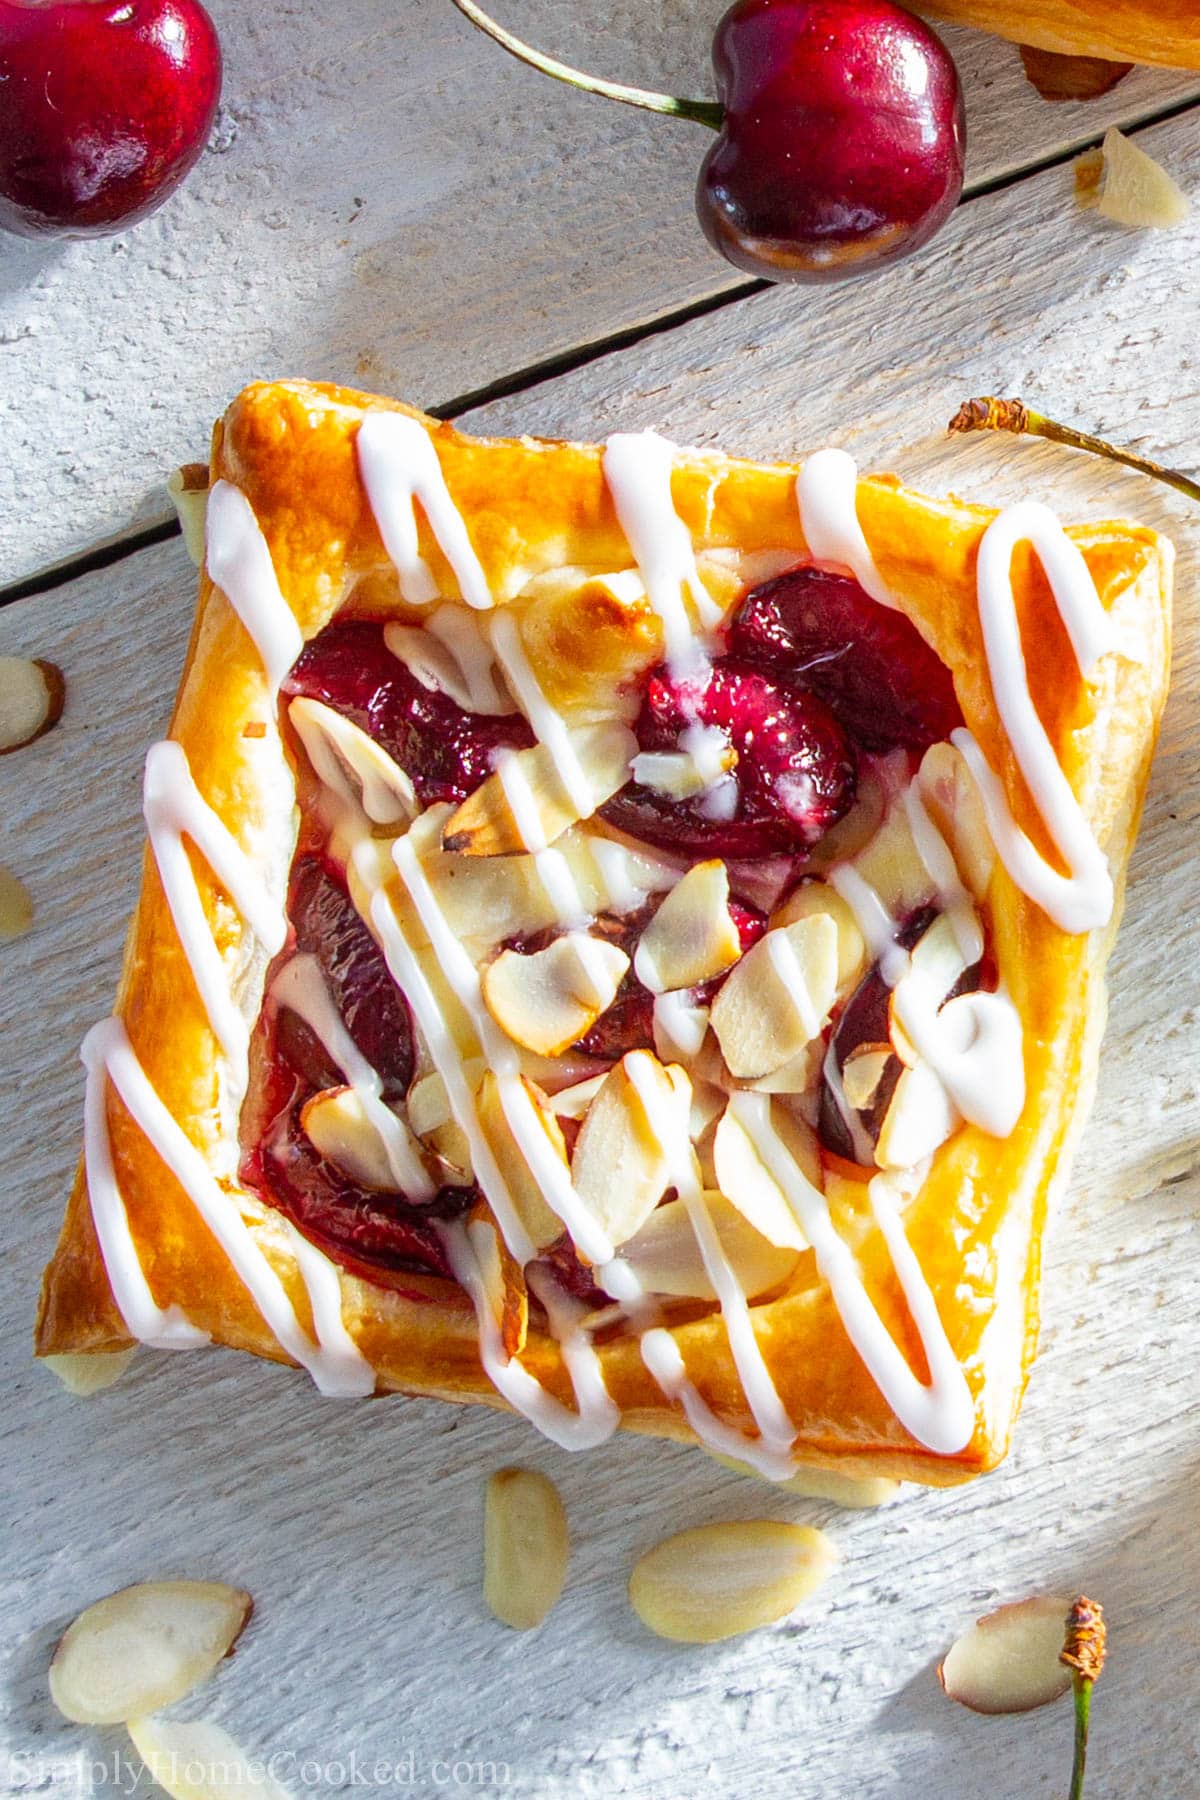 Cherry Danish surrounded by almonds and cherries.